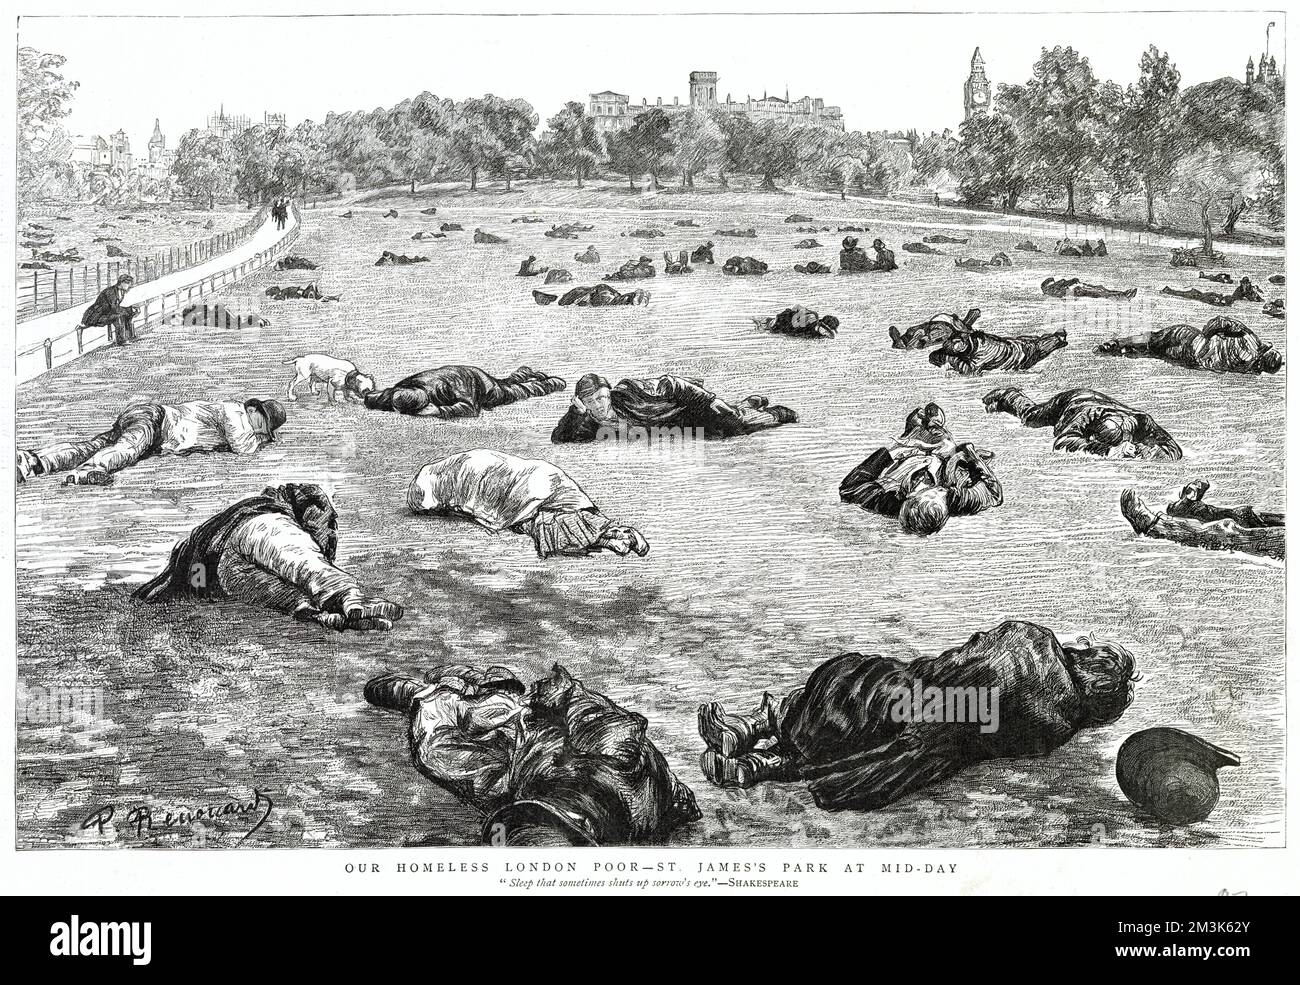 Homeless people catching up on sleep in St. James's Park in London at mid-day. This was in the summer months where the homeless enjoyed the sunshine in an enclosure popularly known as the 'Bull Ring'. An article on the scene appears on page 302 of this issue. Stock Photo